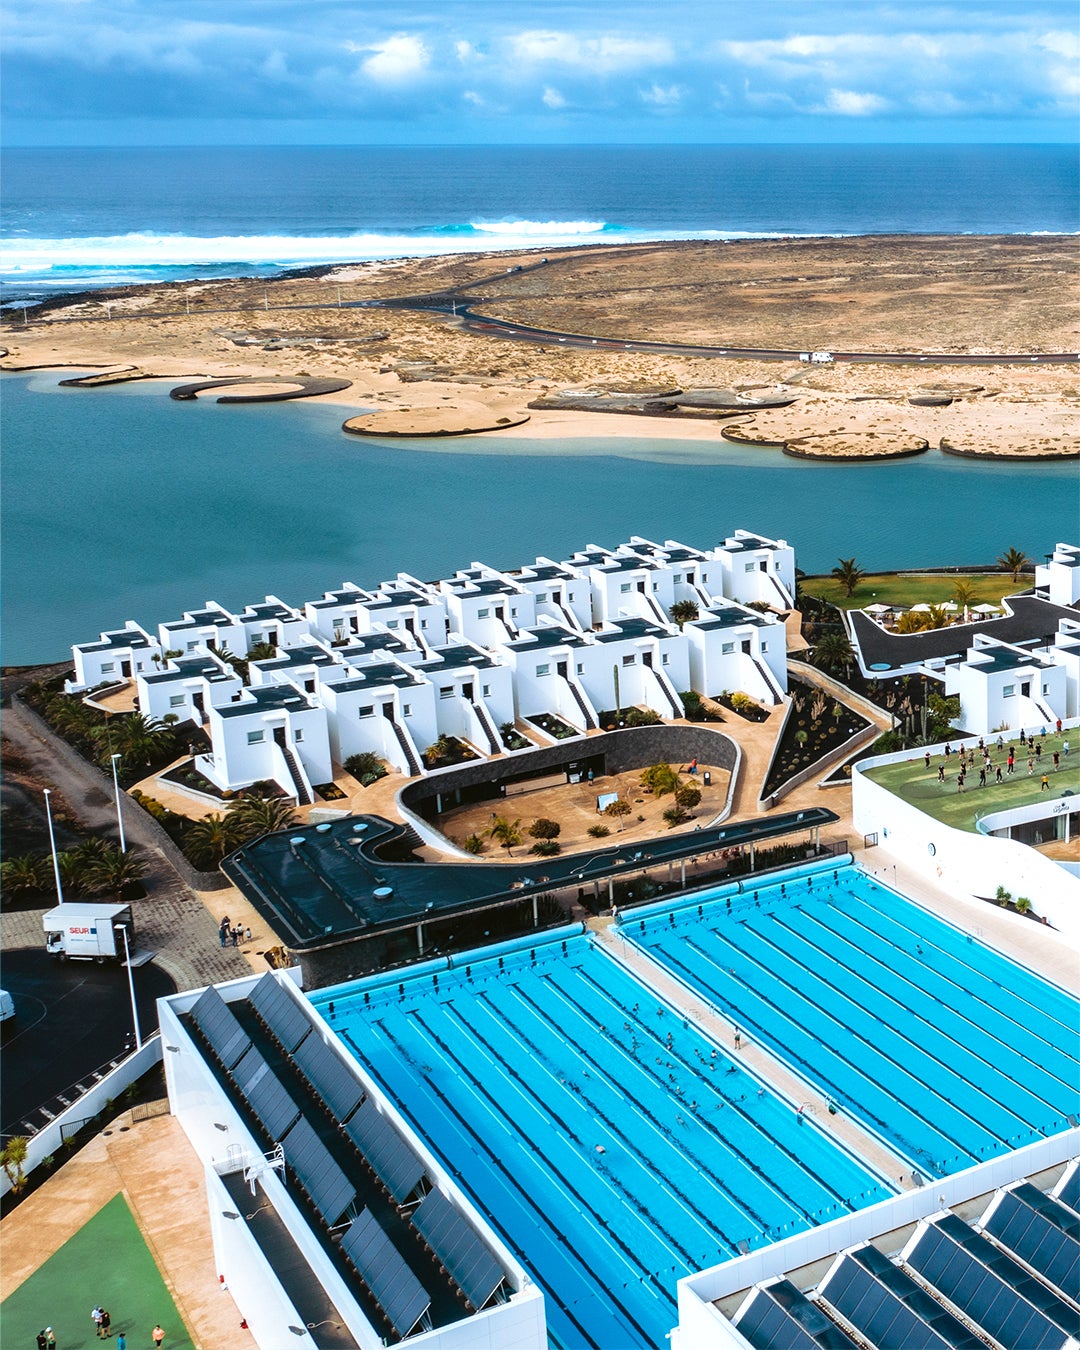 Beyond the pool complex is the lagoon, for open-water swimming, stand-up paddleboarding and windsurfing